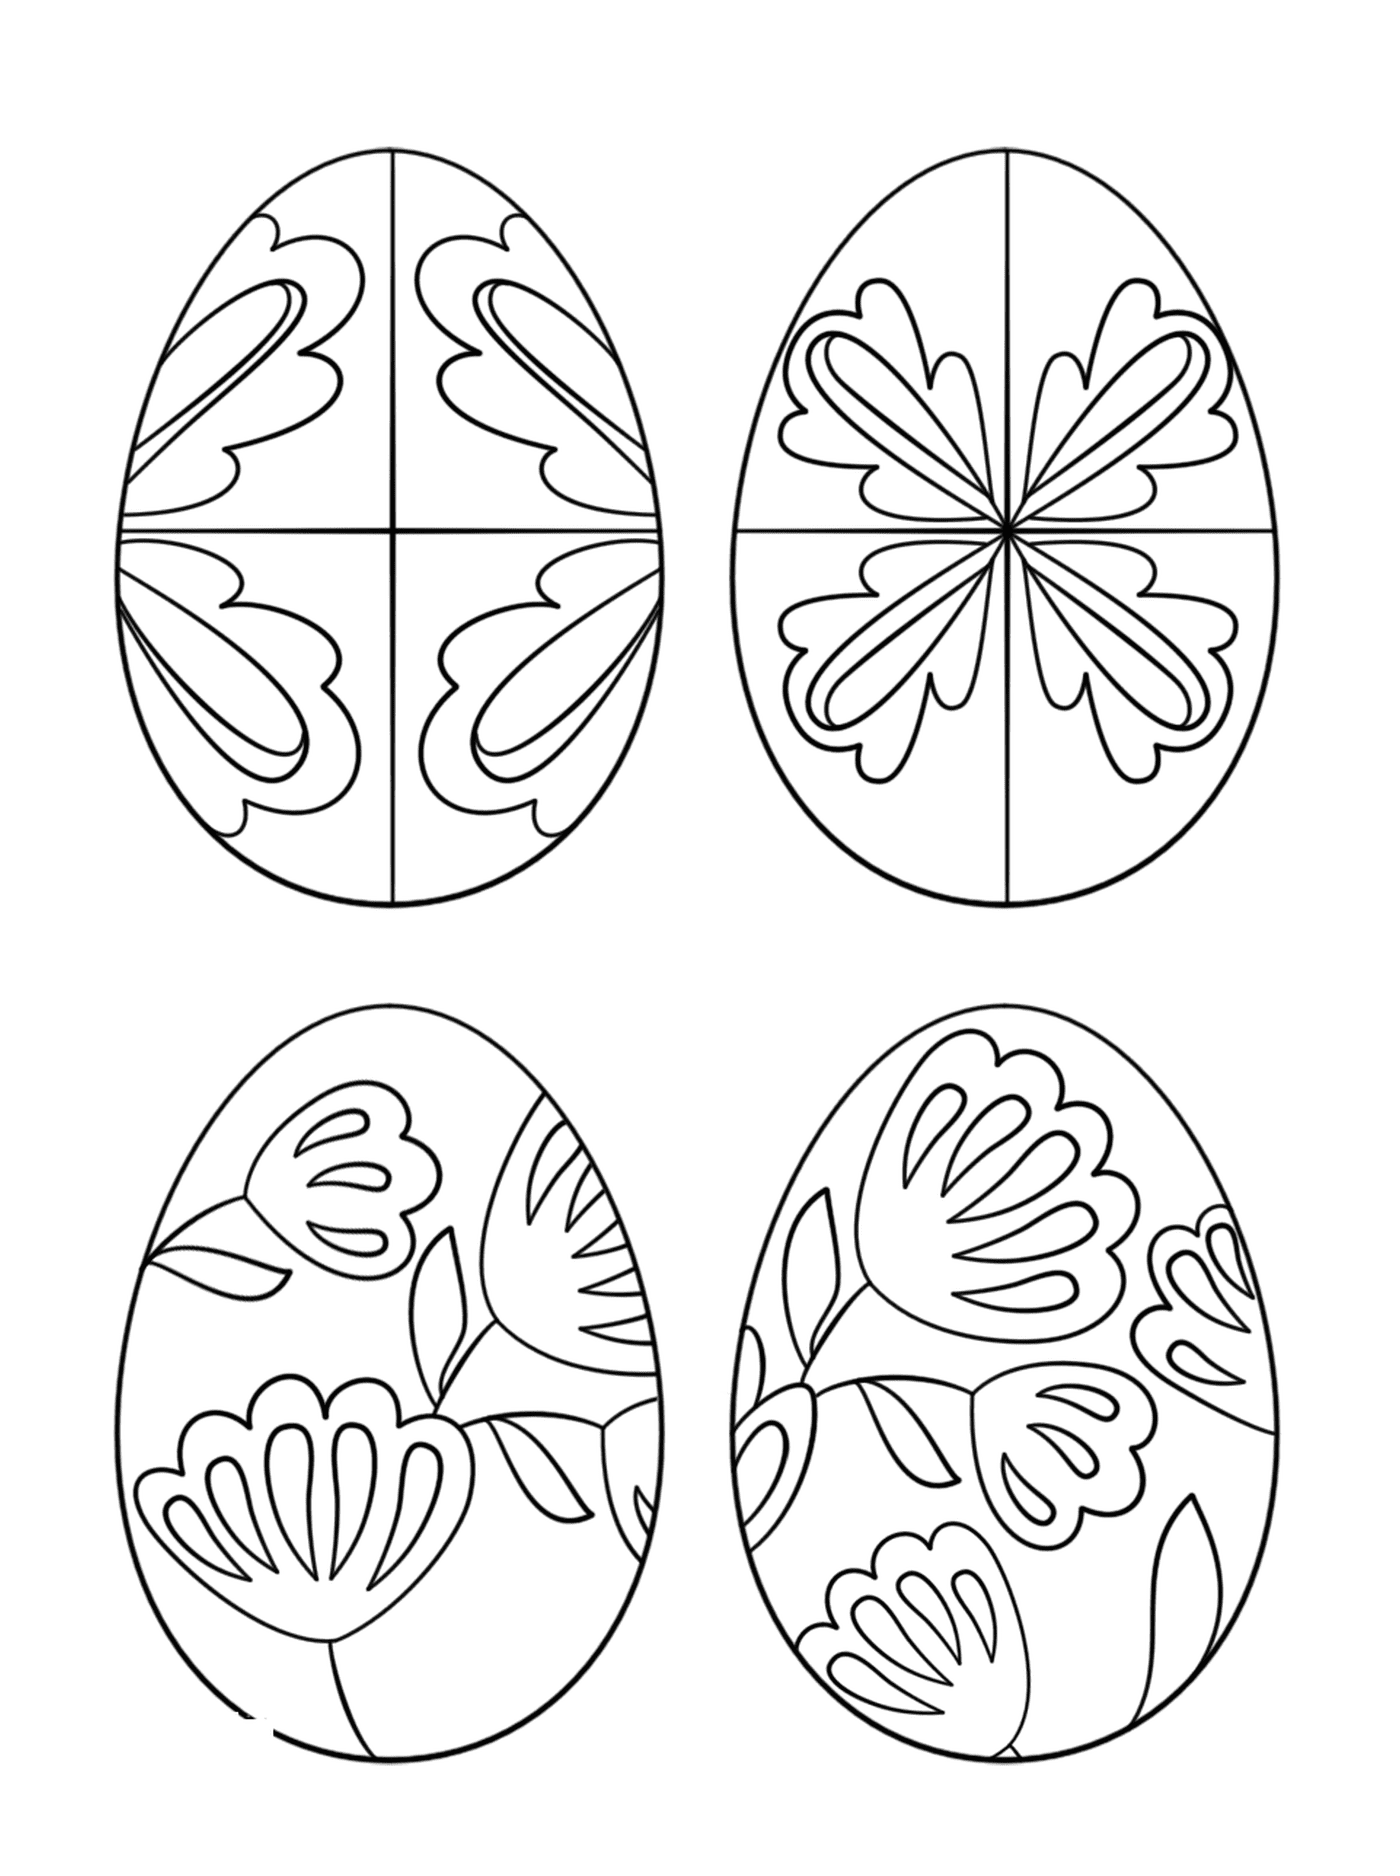  Pysanky eggs, a set of Easter eggs decorated with different patterns 